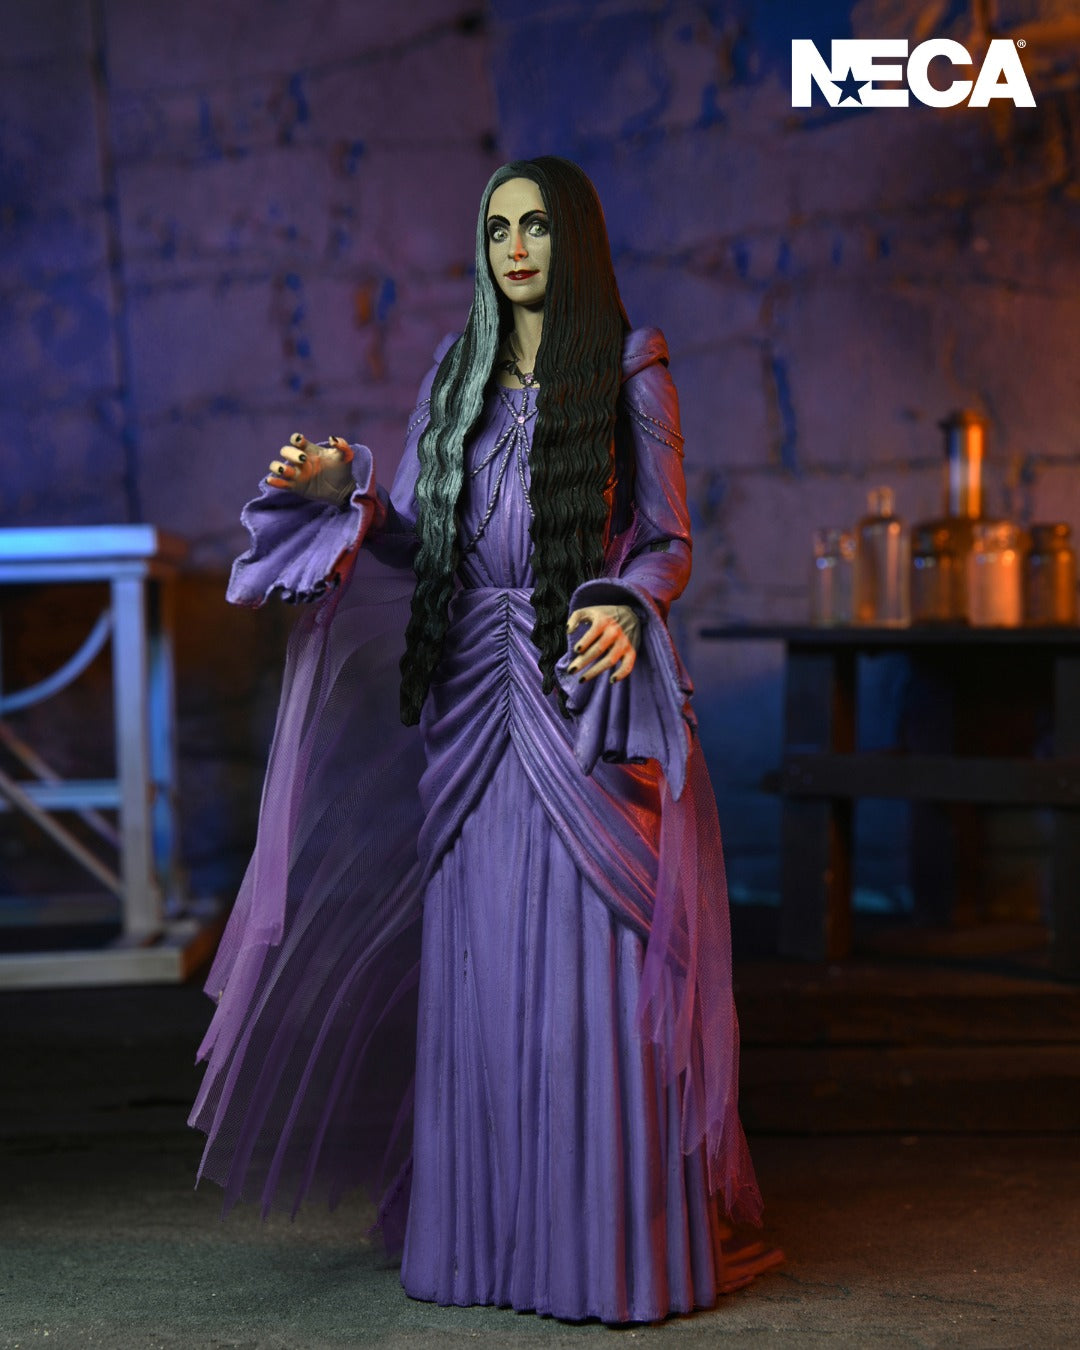 NECA Rob Zombie's The Munsters Ultimate Lily Munster Figure